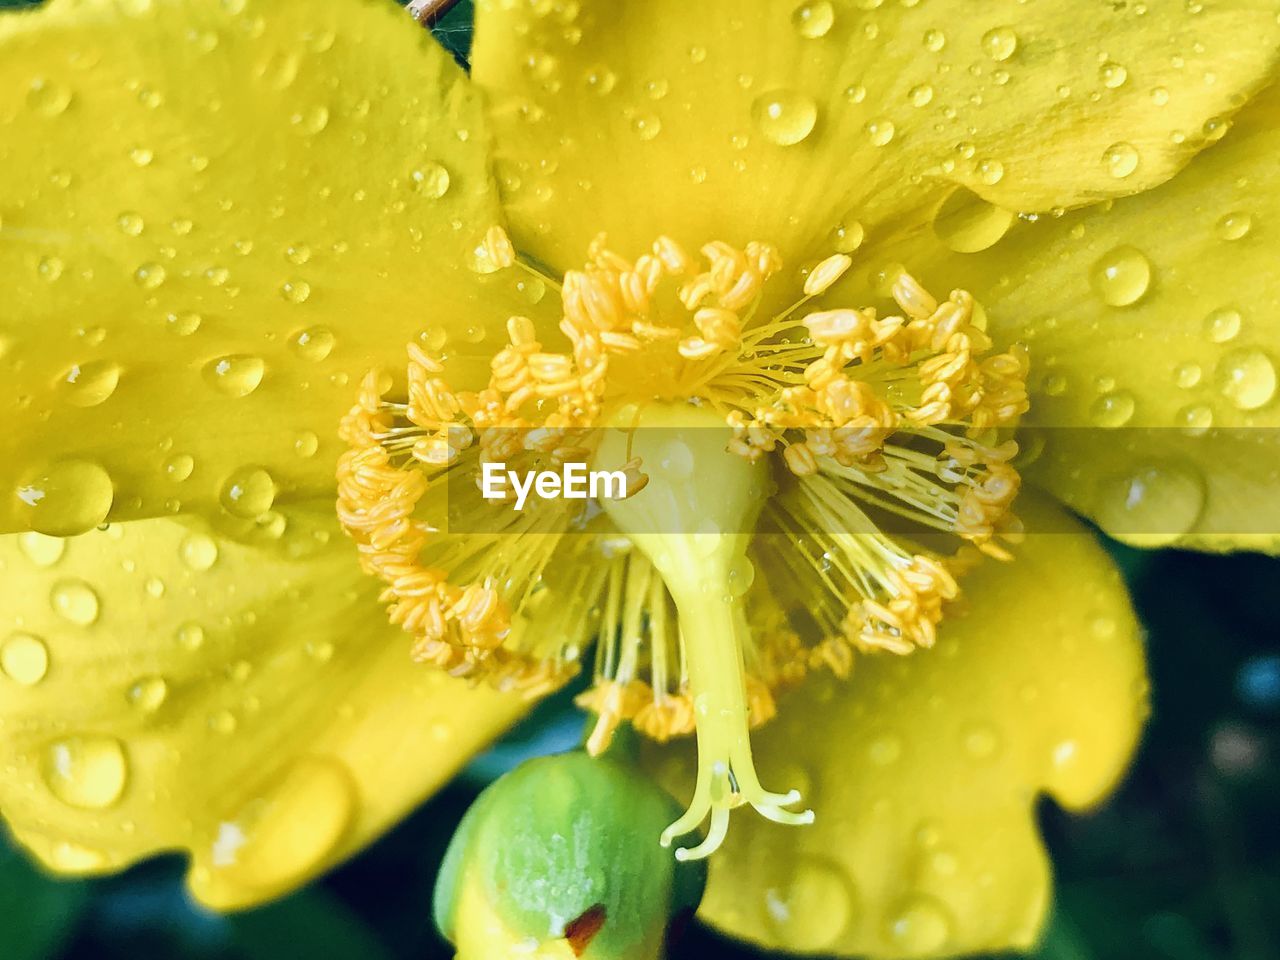 CLOSE-UP OF WATER DROPS ON YELLOW FLOWER